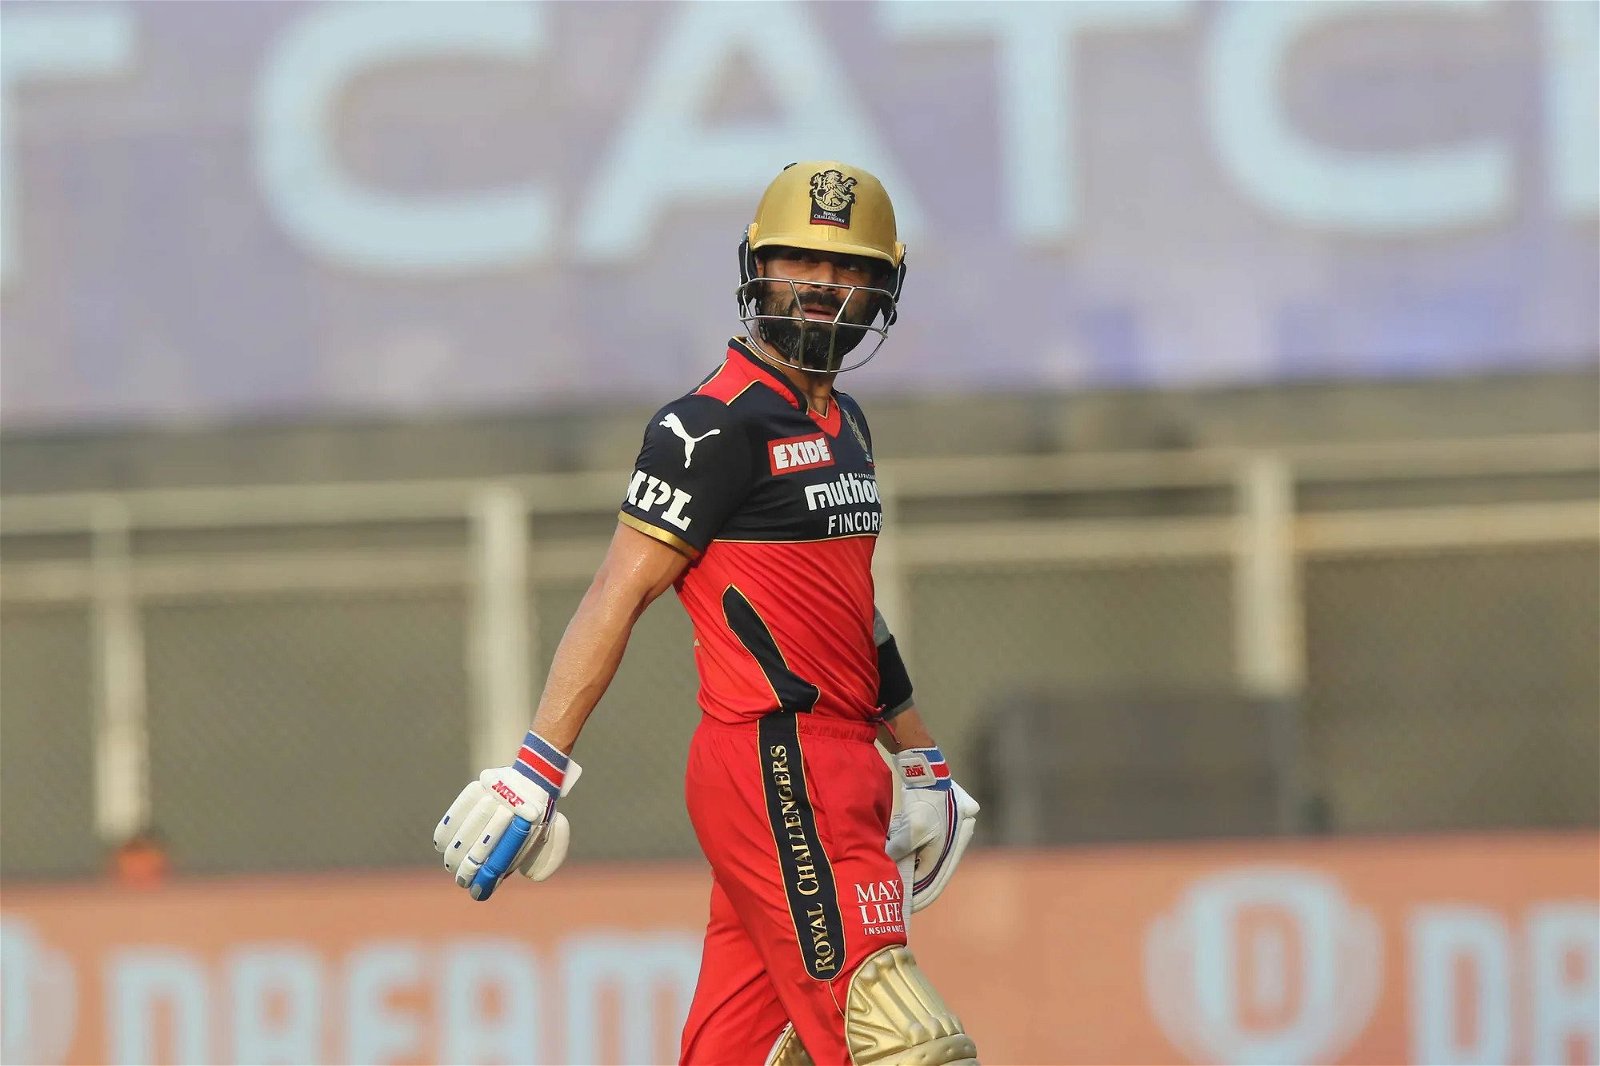 3 Players Who Have The Potential To Replace Virat Kohli As The RCB Captain In IPL 2022